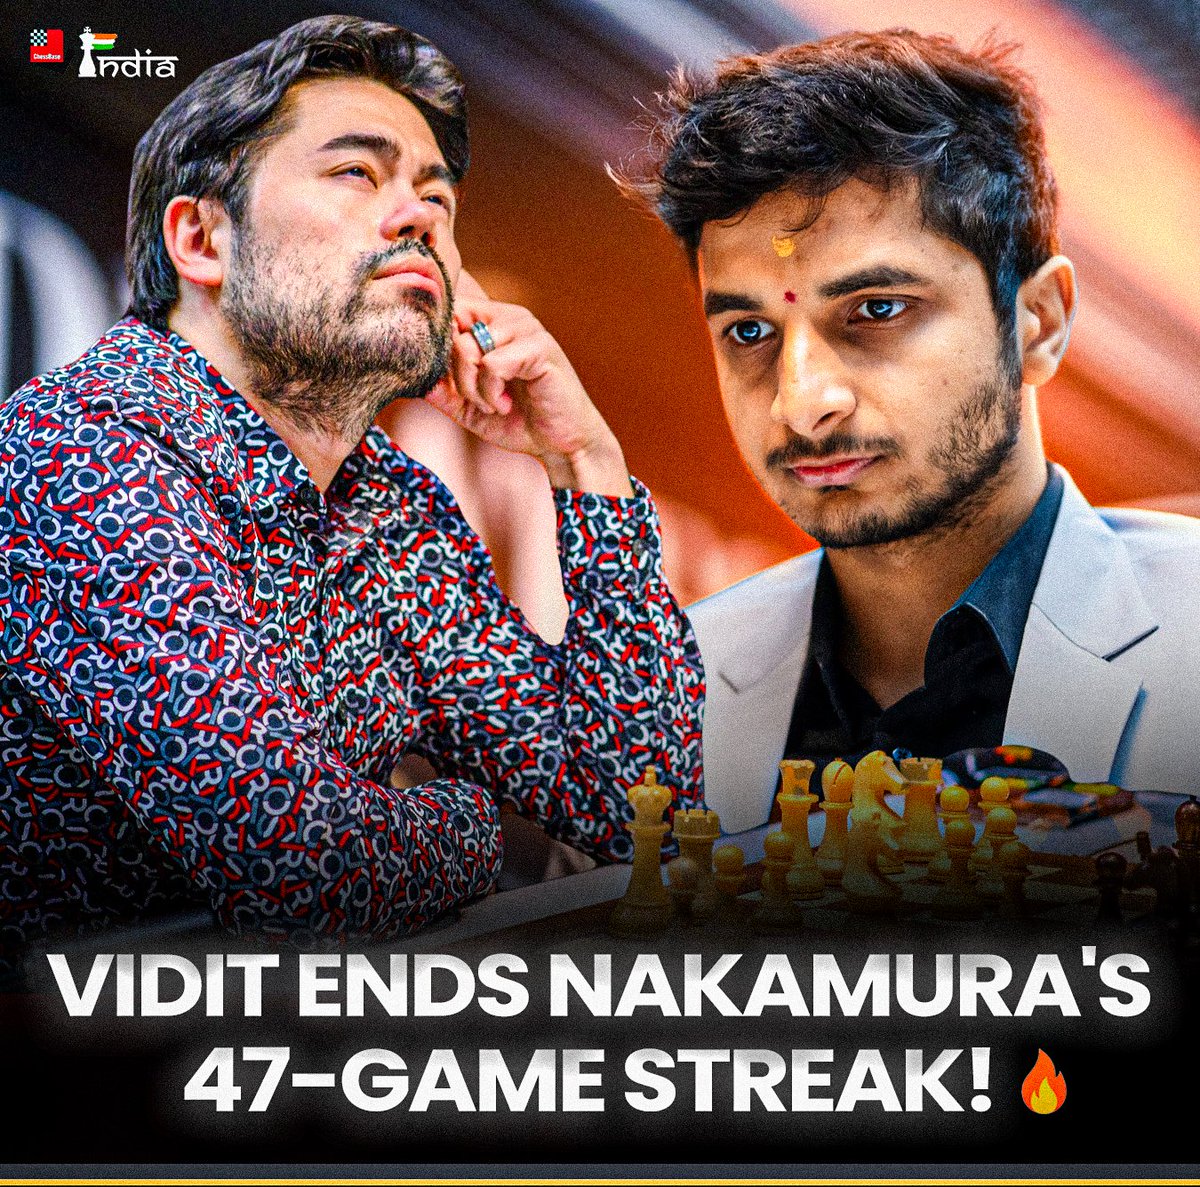 BREAKING: 🇮🇳 GM @viditchess unleashed high quality opening preparation as Black and outclassed speed phenom 🇺🇸 GM Hikaru Nakamura in 29 moves at #Candidates2024 ! #viditftw #viditgujrathi #hikaru #Chess